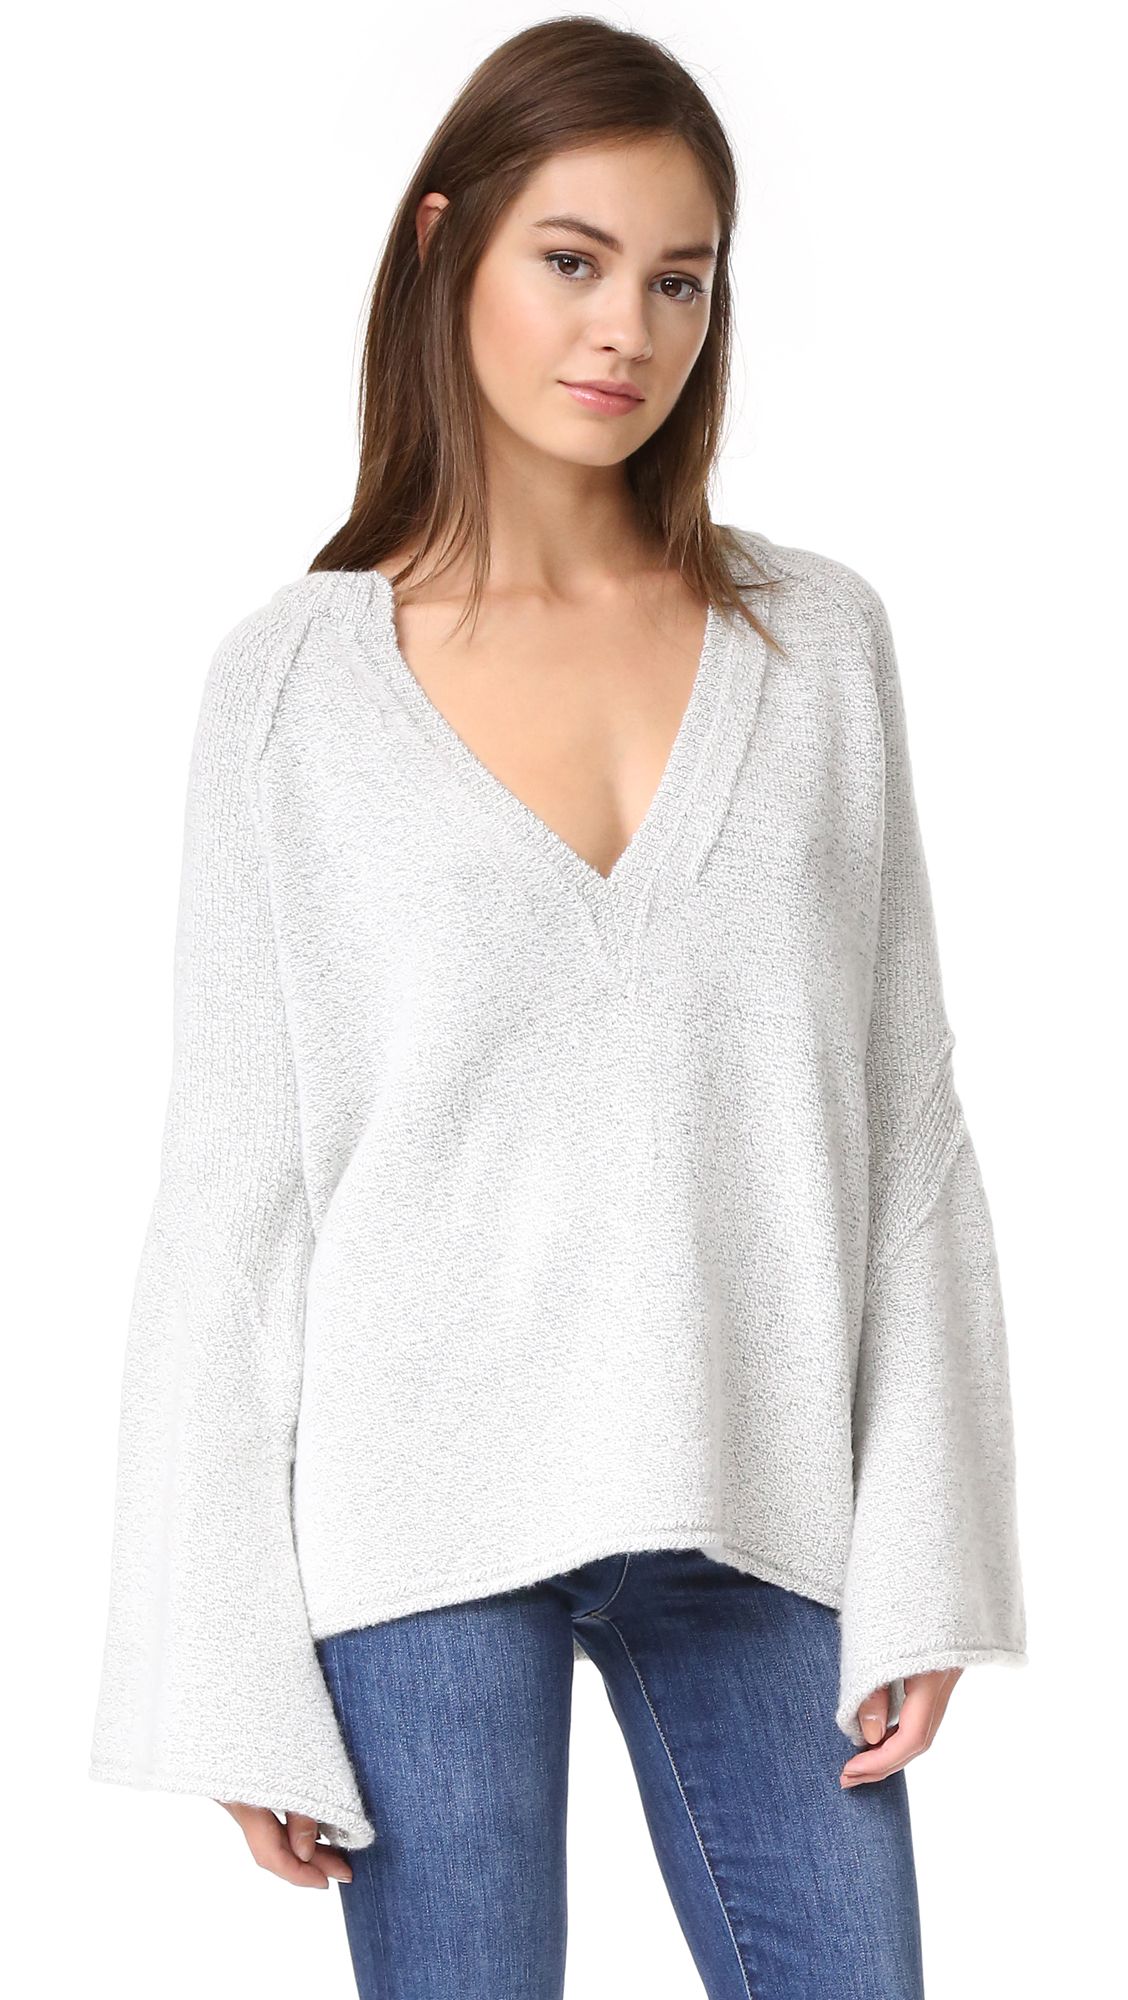 Lovely Lines Sweater | Shopbop